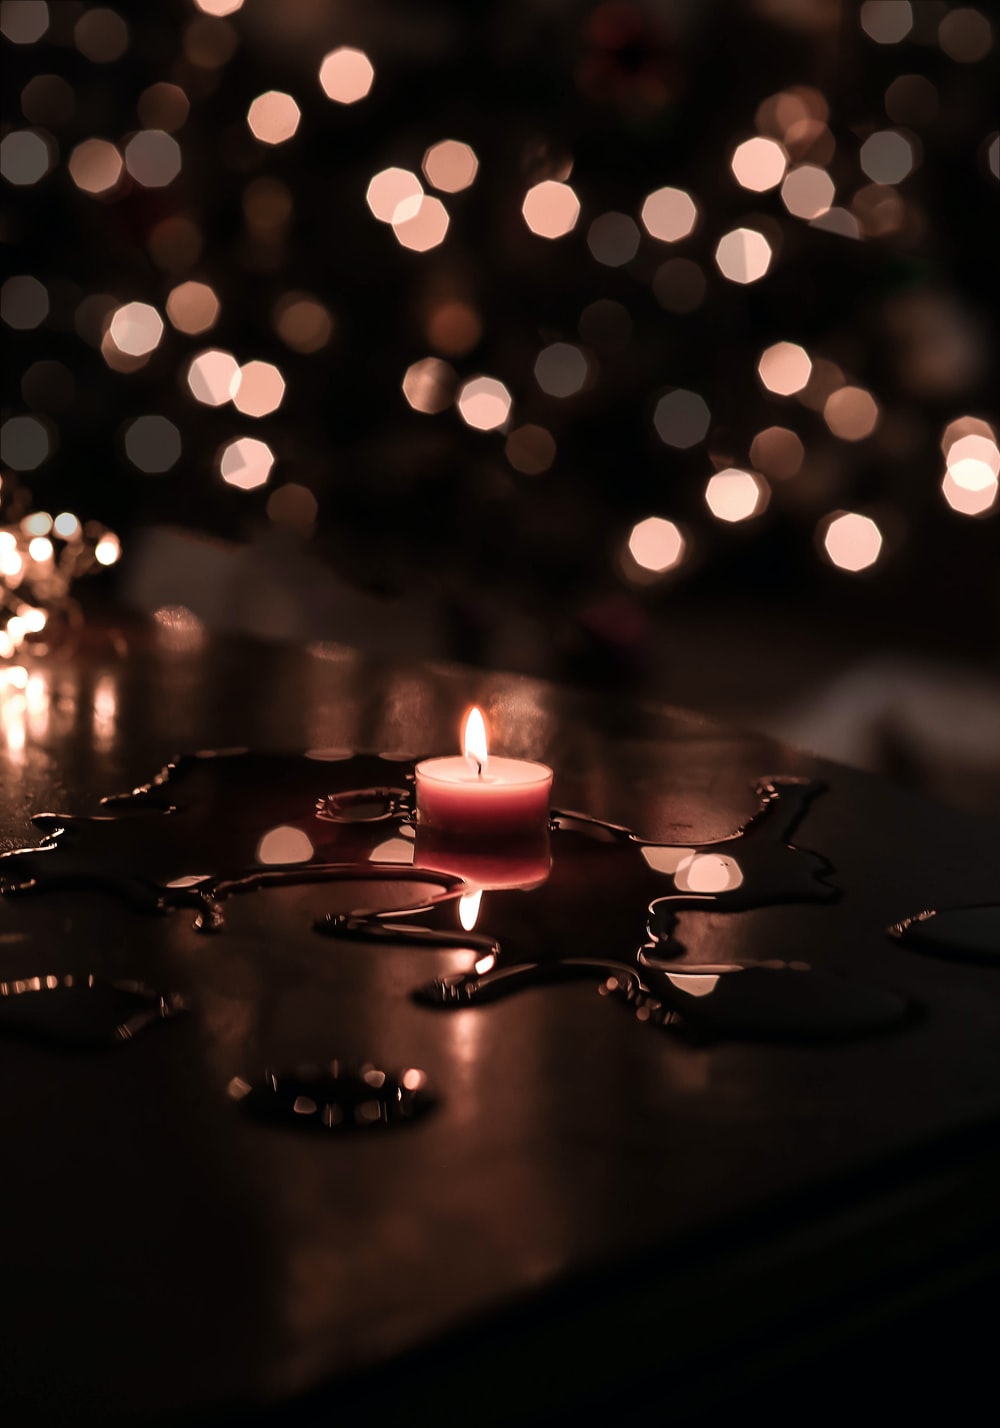 Candle Light Dinner Picture. Download Free Image